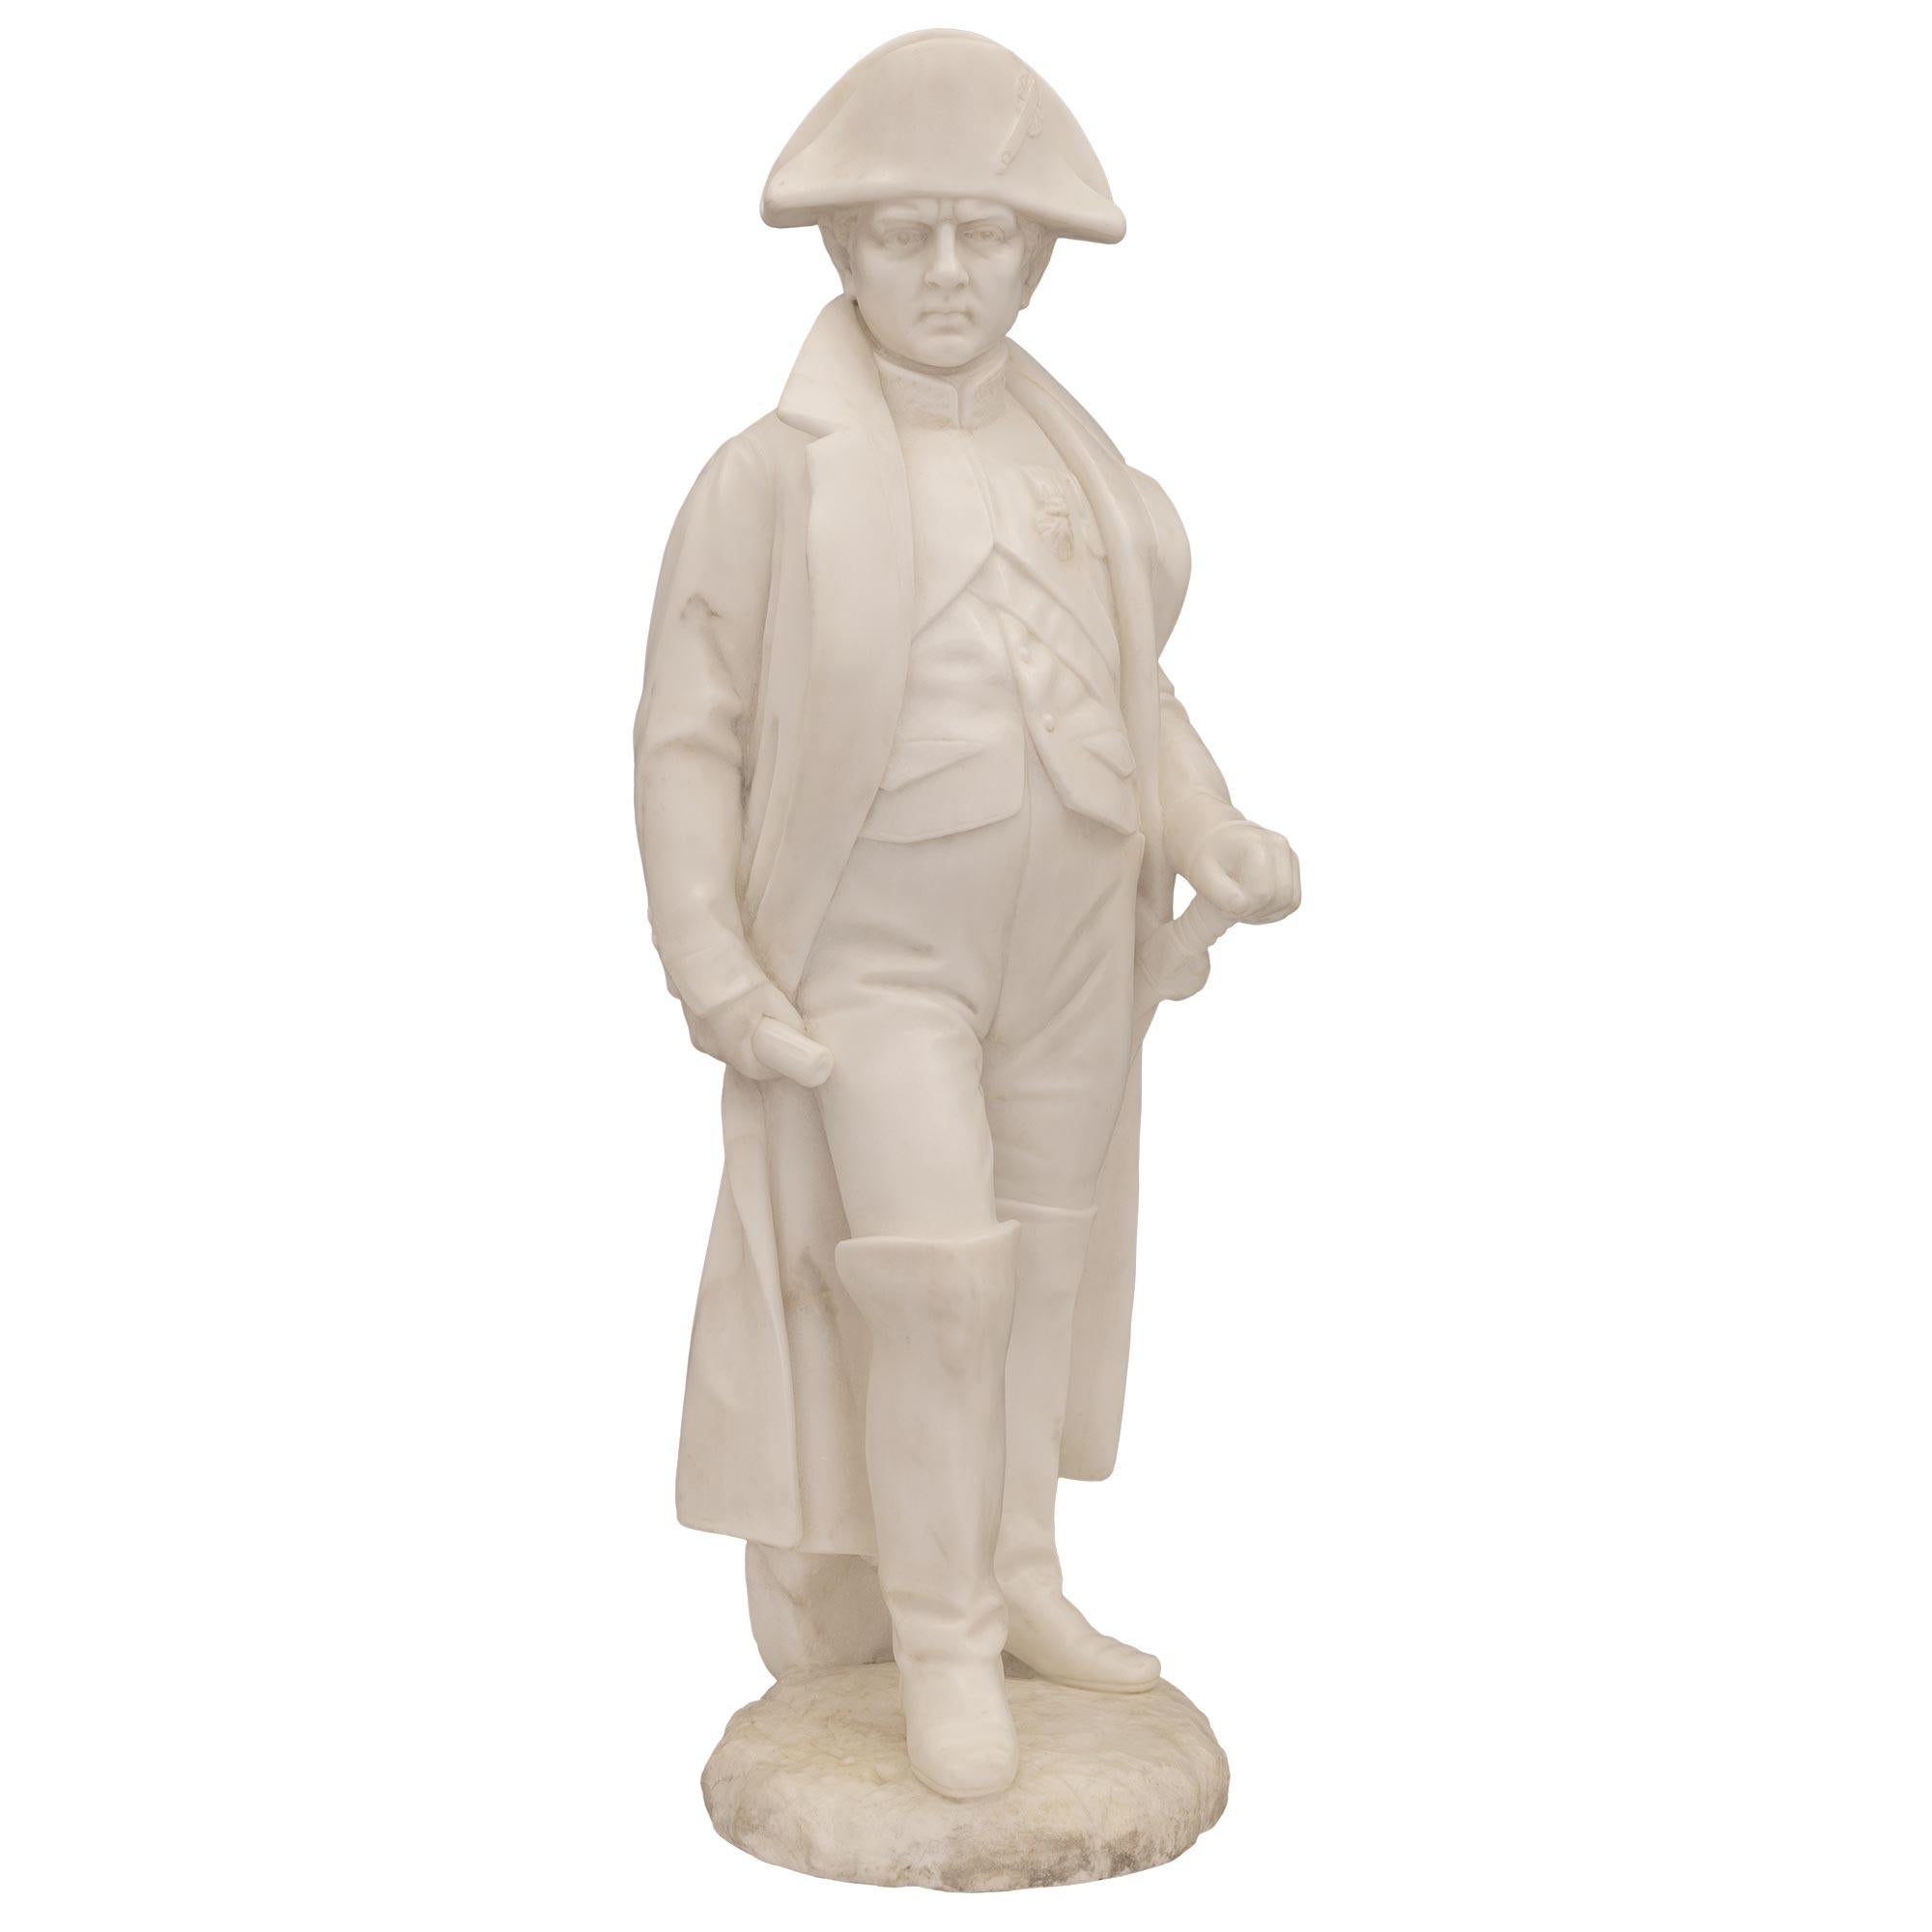 A striking French 19th century white Carrara marble statue of Napoleon. The statue is raised by a fine circular ground designed base where Napoleon is standing. He is dressed in his chasseur uniform with a wonderfully detailed flowing cloak and